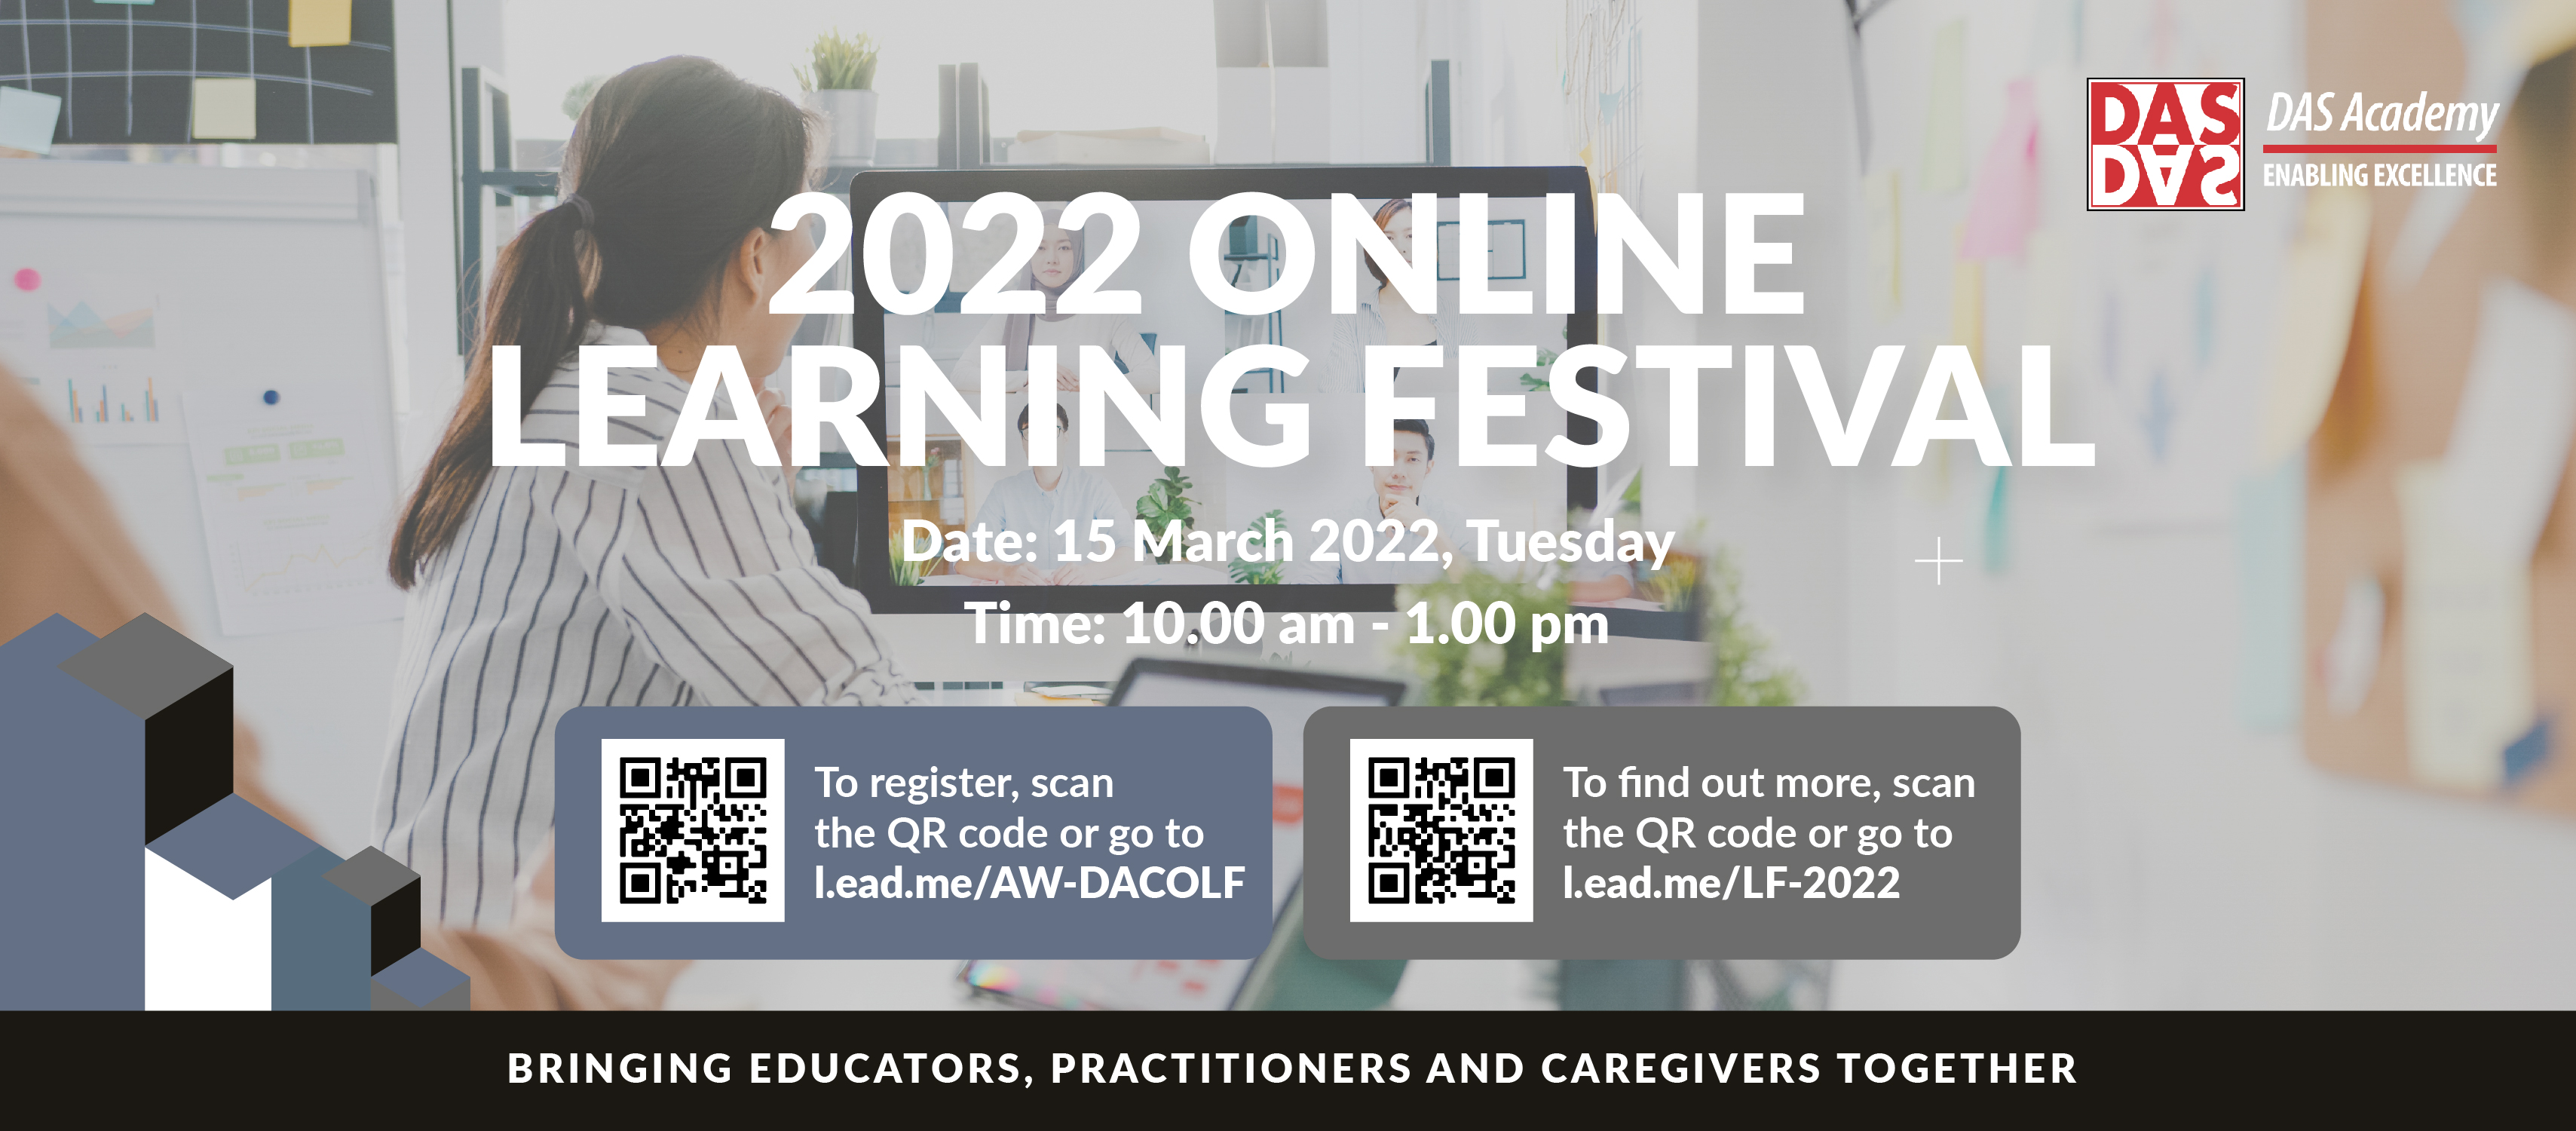 DAS Academy: LEARNING FESTIVAL, Online Event